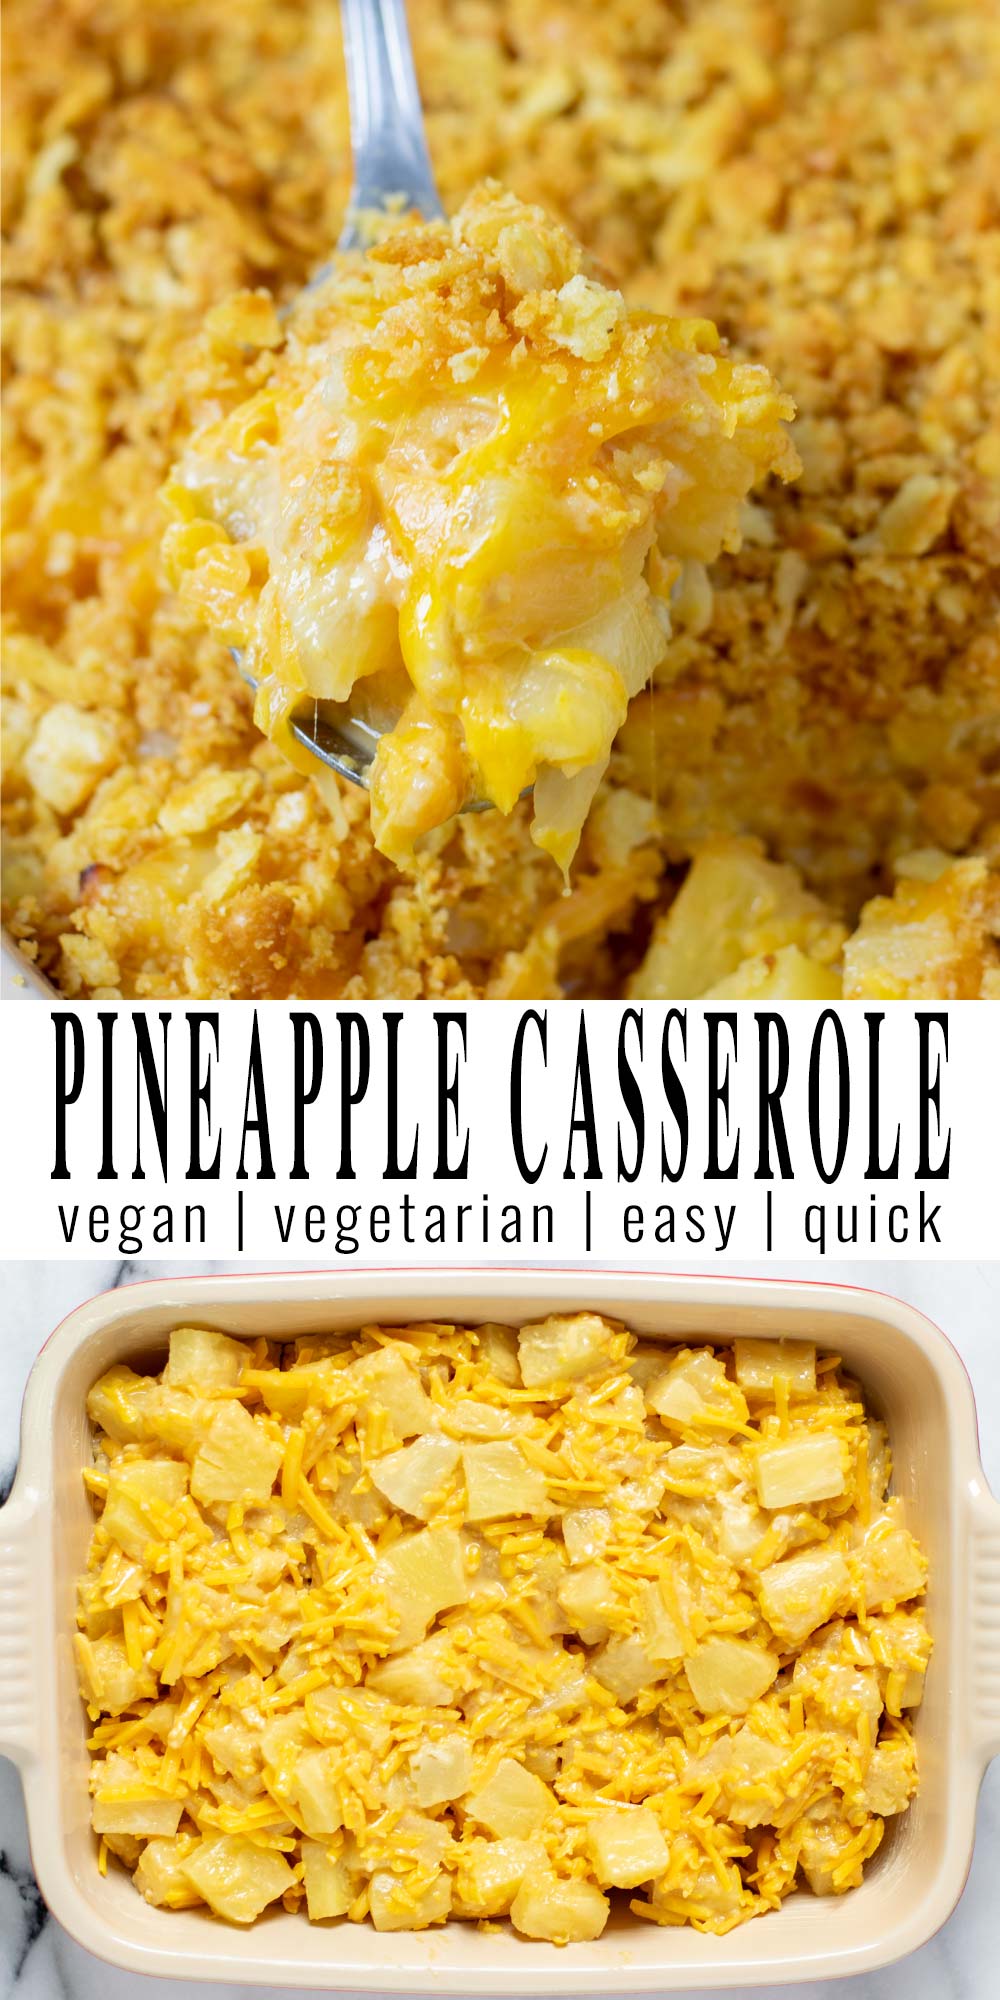 Collage of two pictures of the Pineapple Casserole with recipe title text.